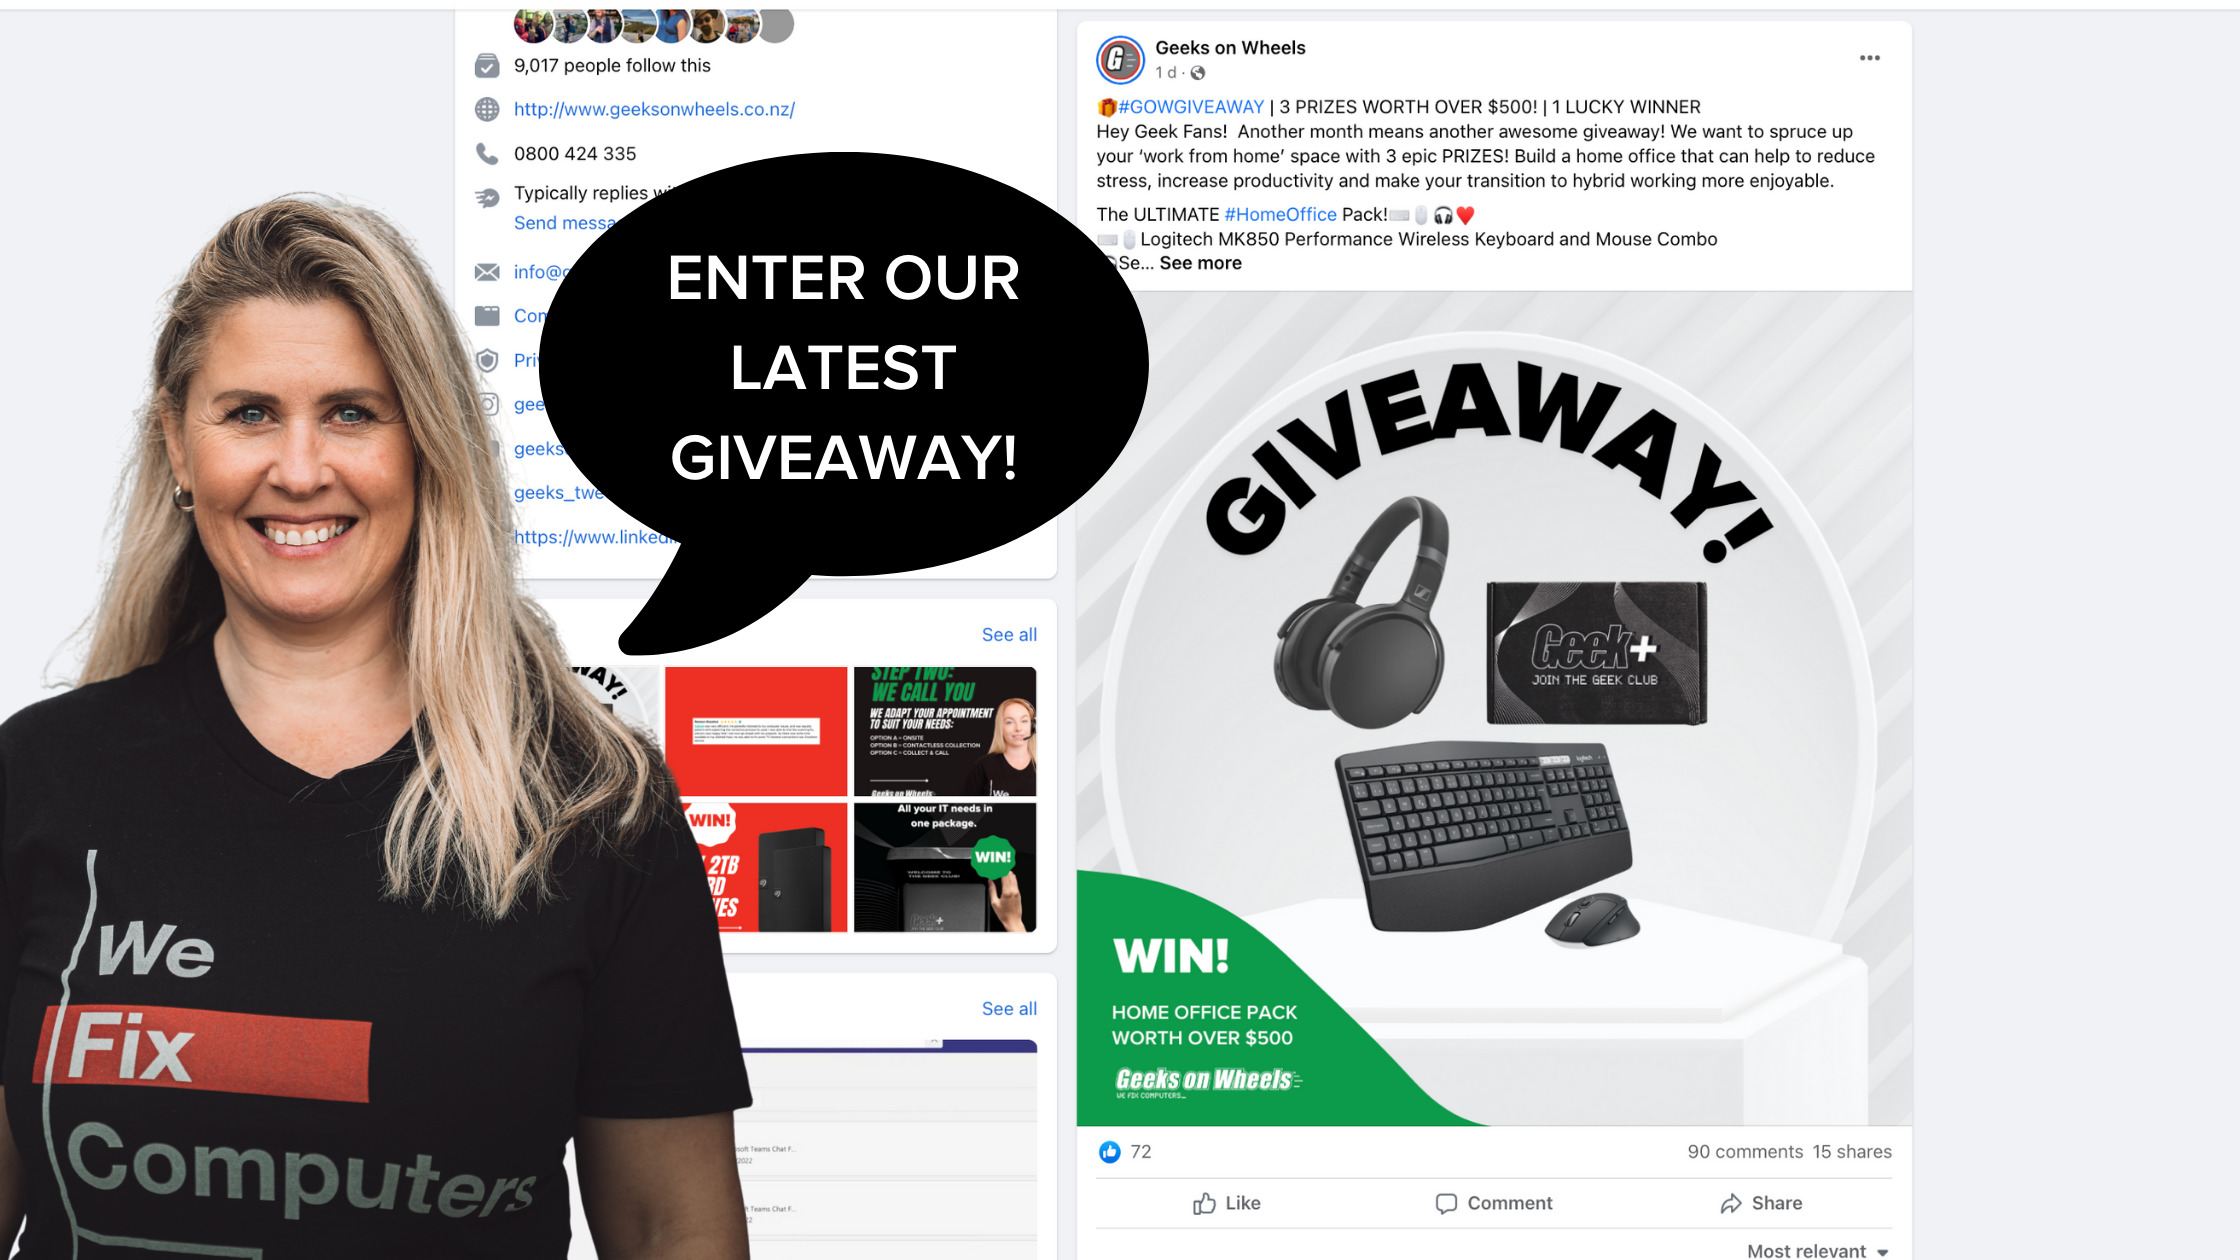 Home Office pack giveaway